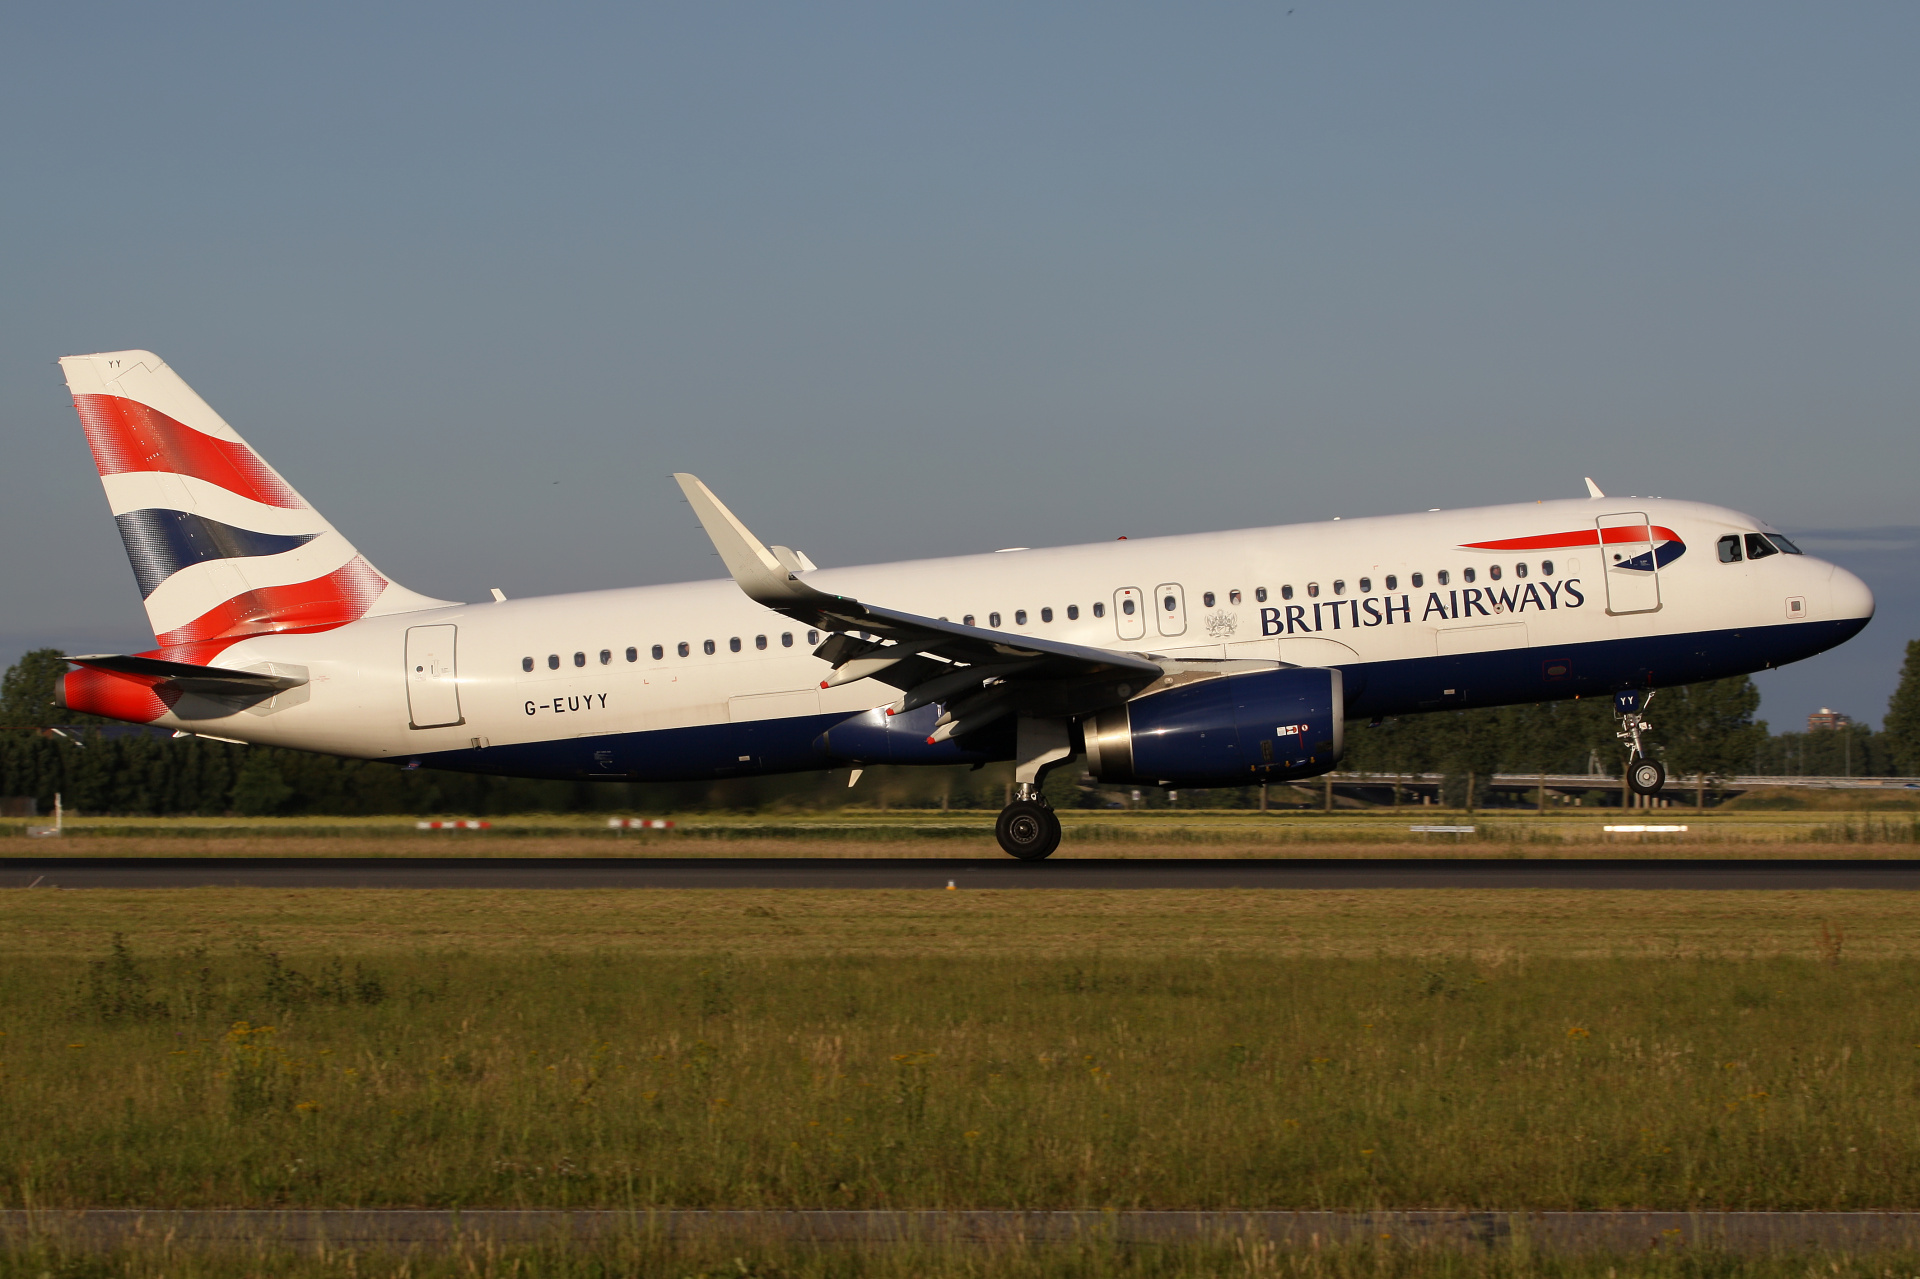 G-EUYY, British Airways (Aircraft » Schiphol Spotting » Airbus A320-200)